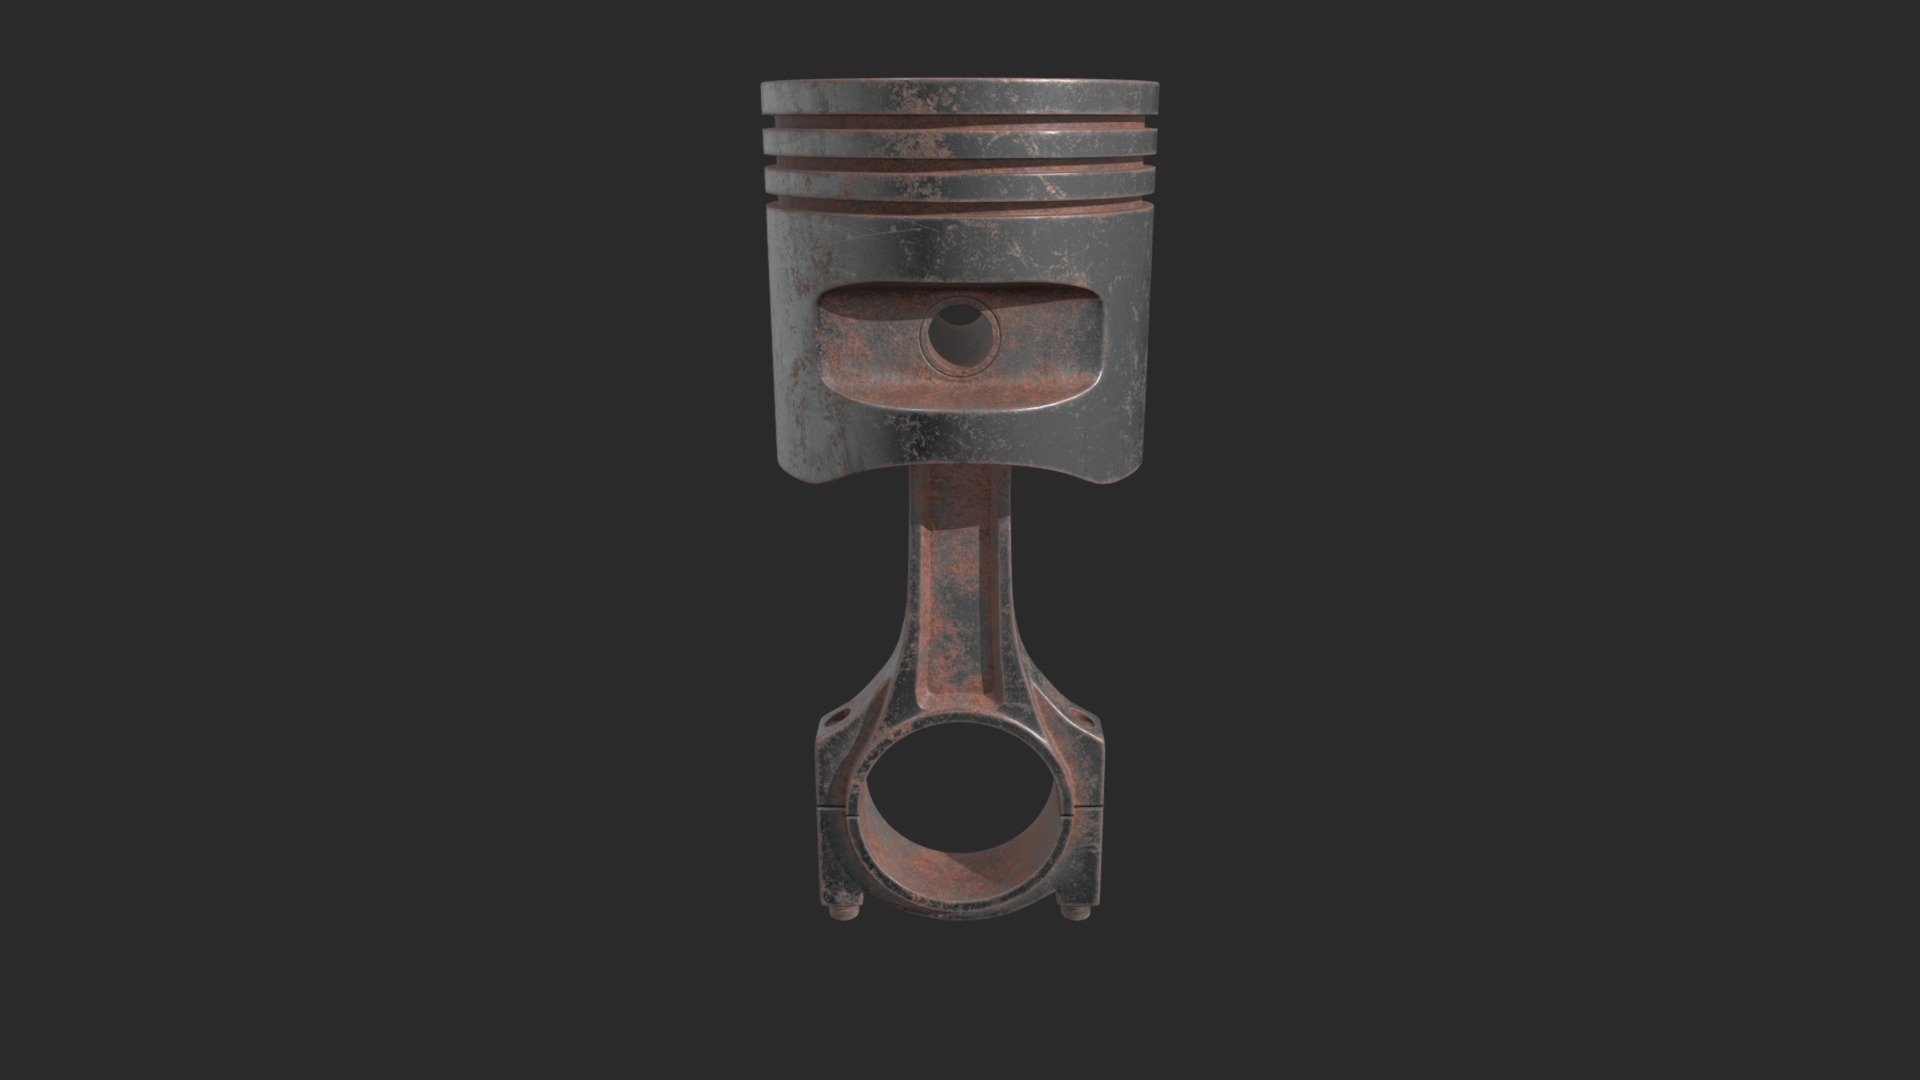 3d model of the engine piston

Hard surface modeling

To create, I used the following software:

 * To create a mesh - 3ds Max

 * UV mapping - 3ds Max

 * Texturing - Substance 3d Painter

 * Rendering - Substance 3d Painter

 

  I'm in Artstation

I'm in Instagram 

I'm in Vk
 - Engine Piston - 3D model by Leh1ch3F 3d model